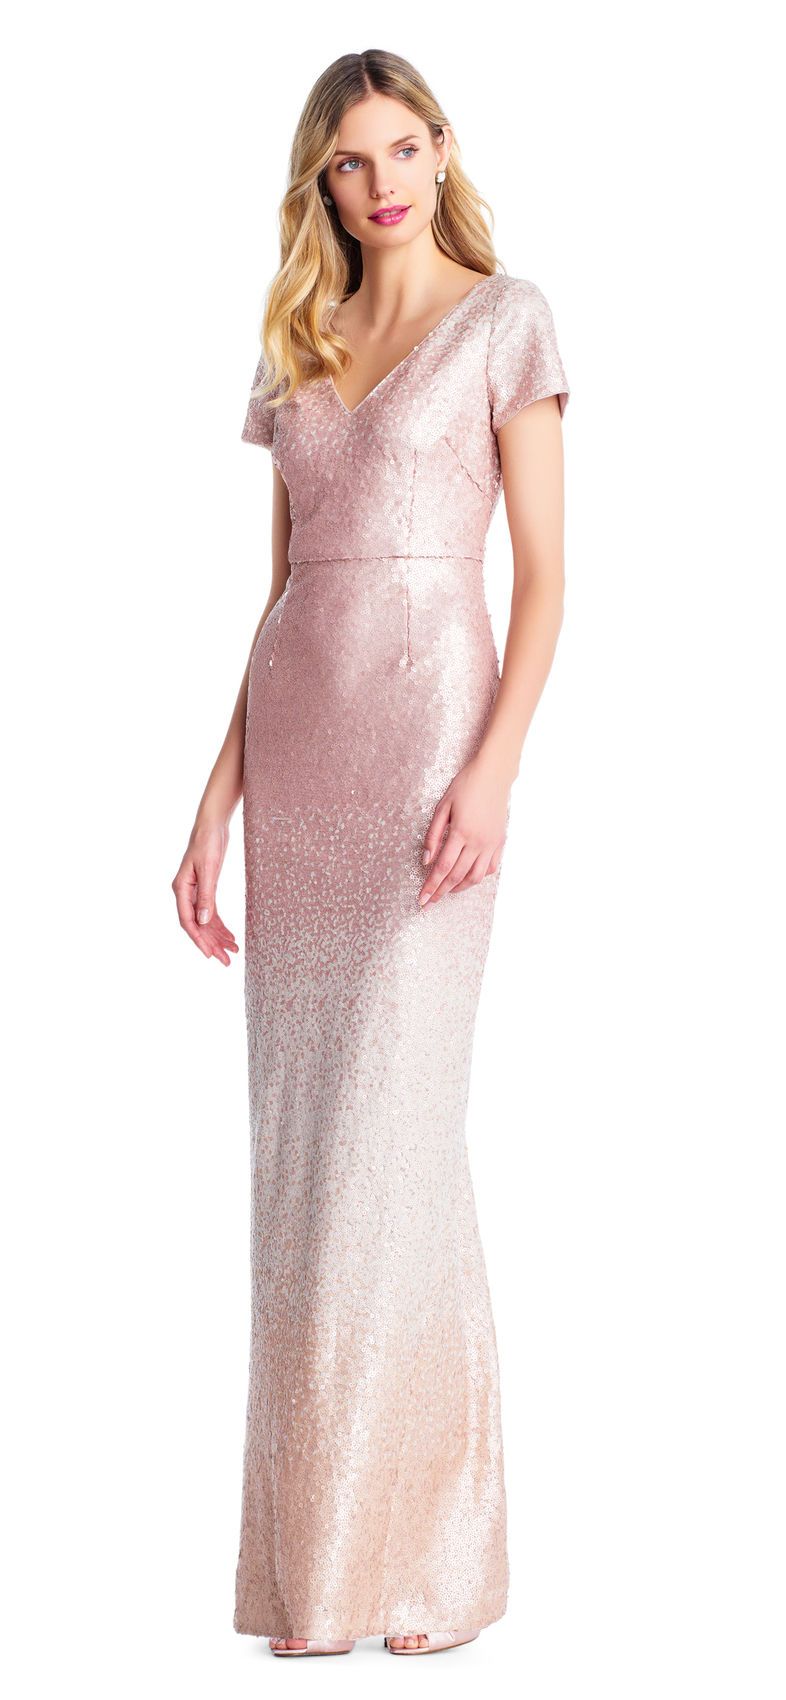 Adrianna Papell - AP1E203460 Sequin Embellished V-Neck Dress In Pink and Multi-Color